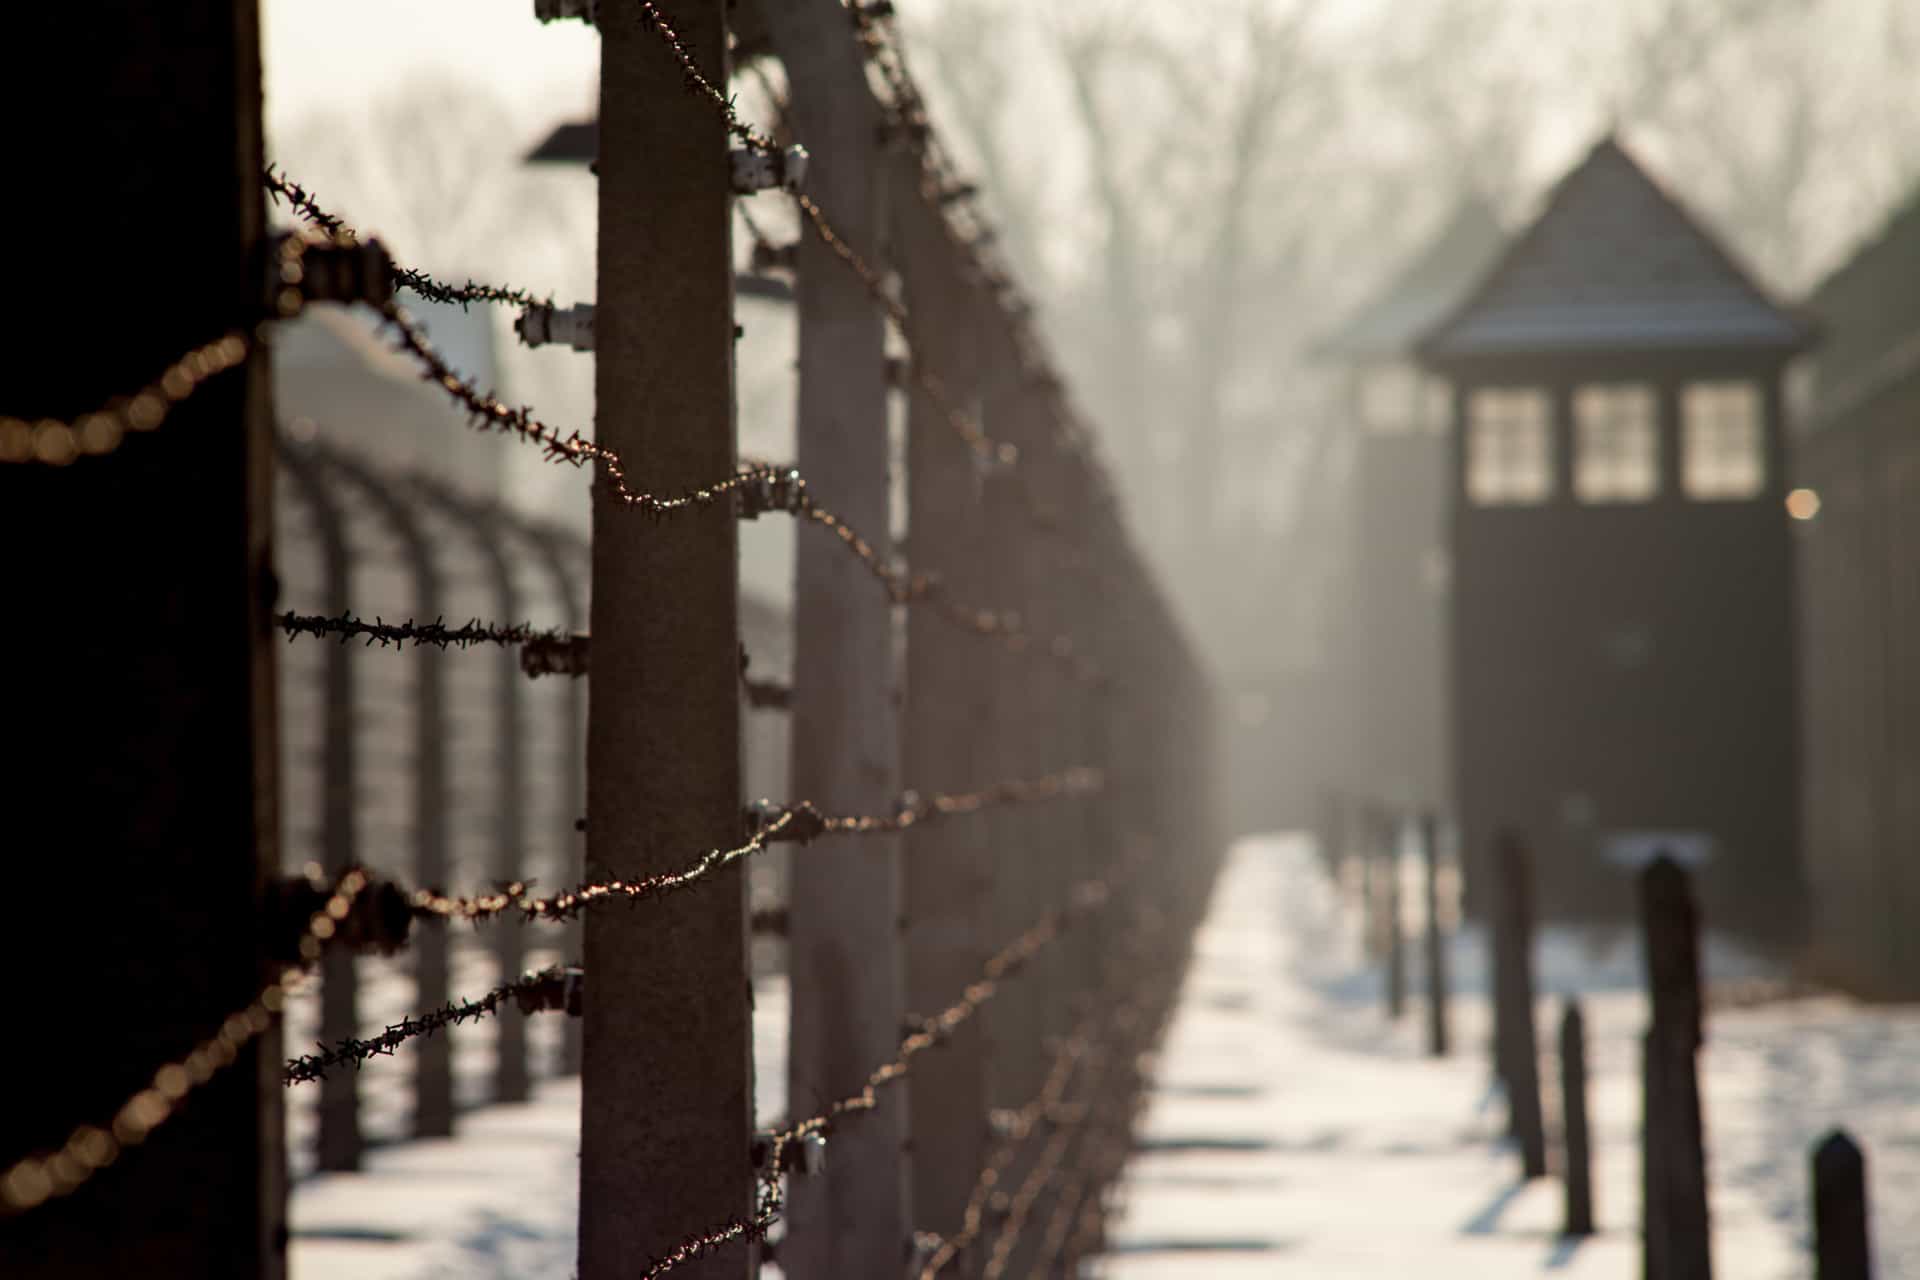 According to the Jewish Vitual Library website, more than a third of the Jewish population of Germany was murdered during the Holocaust.<p><a href="https://www.msn.com/en-us/community/channel/vid-7xx8mnucu55yw63we9va2gwr7uihbxwc68fxqp25x6tg4ftibpra?cvid=94631541bc0f4f89bfd59158d696ad7e">Follow us and access great exclusive content everyday</a></p>